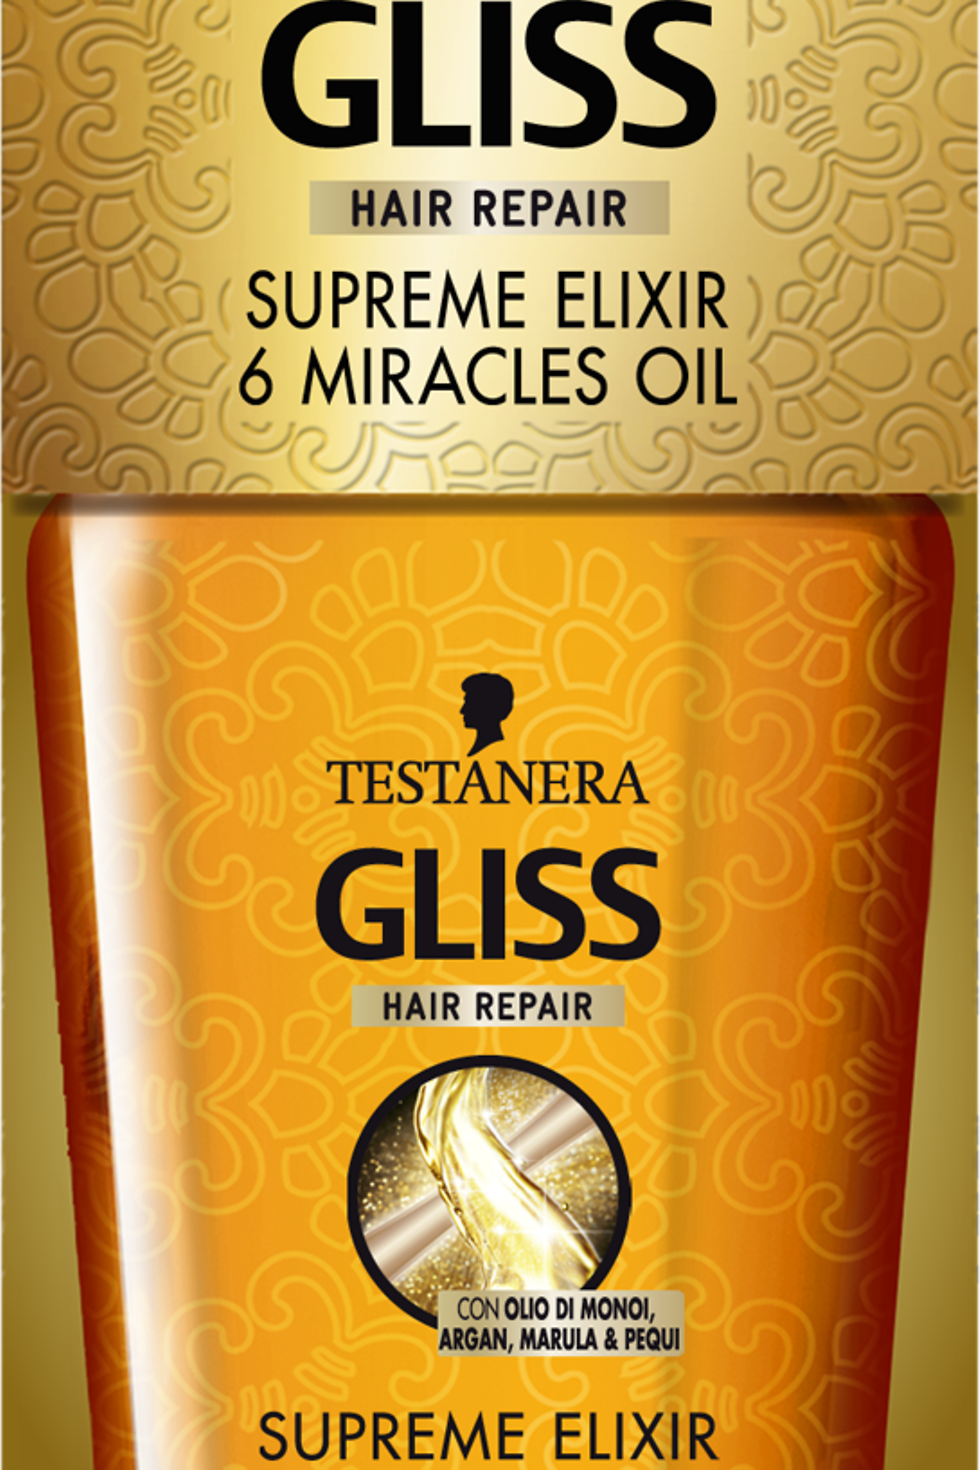 Gliss Supreme Elixir 6 Miracles Oil